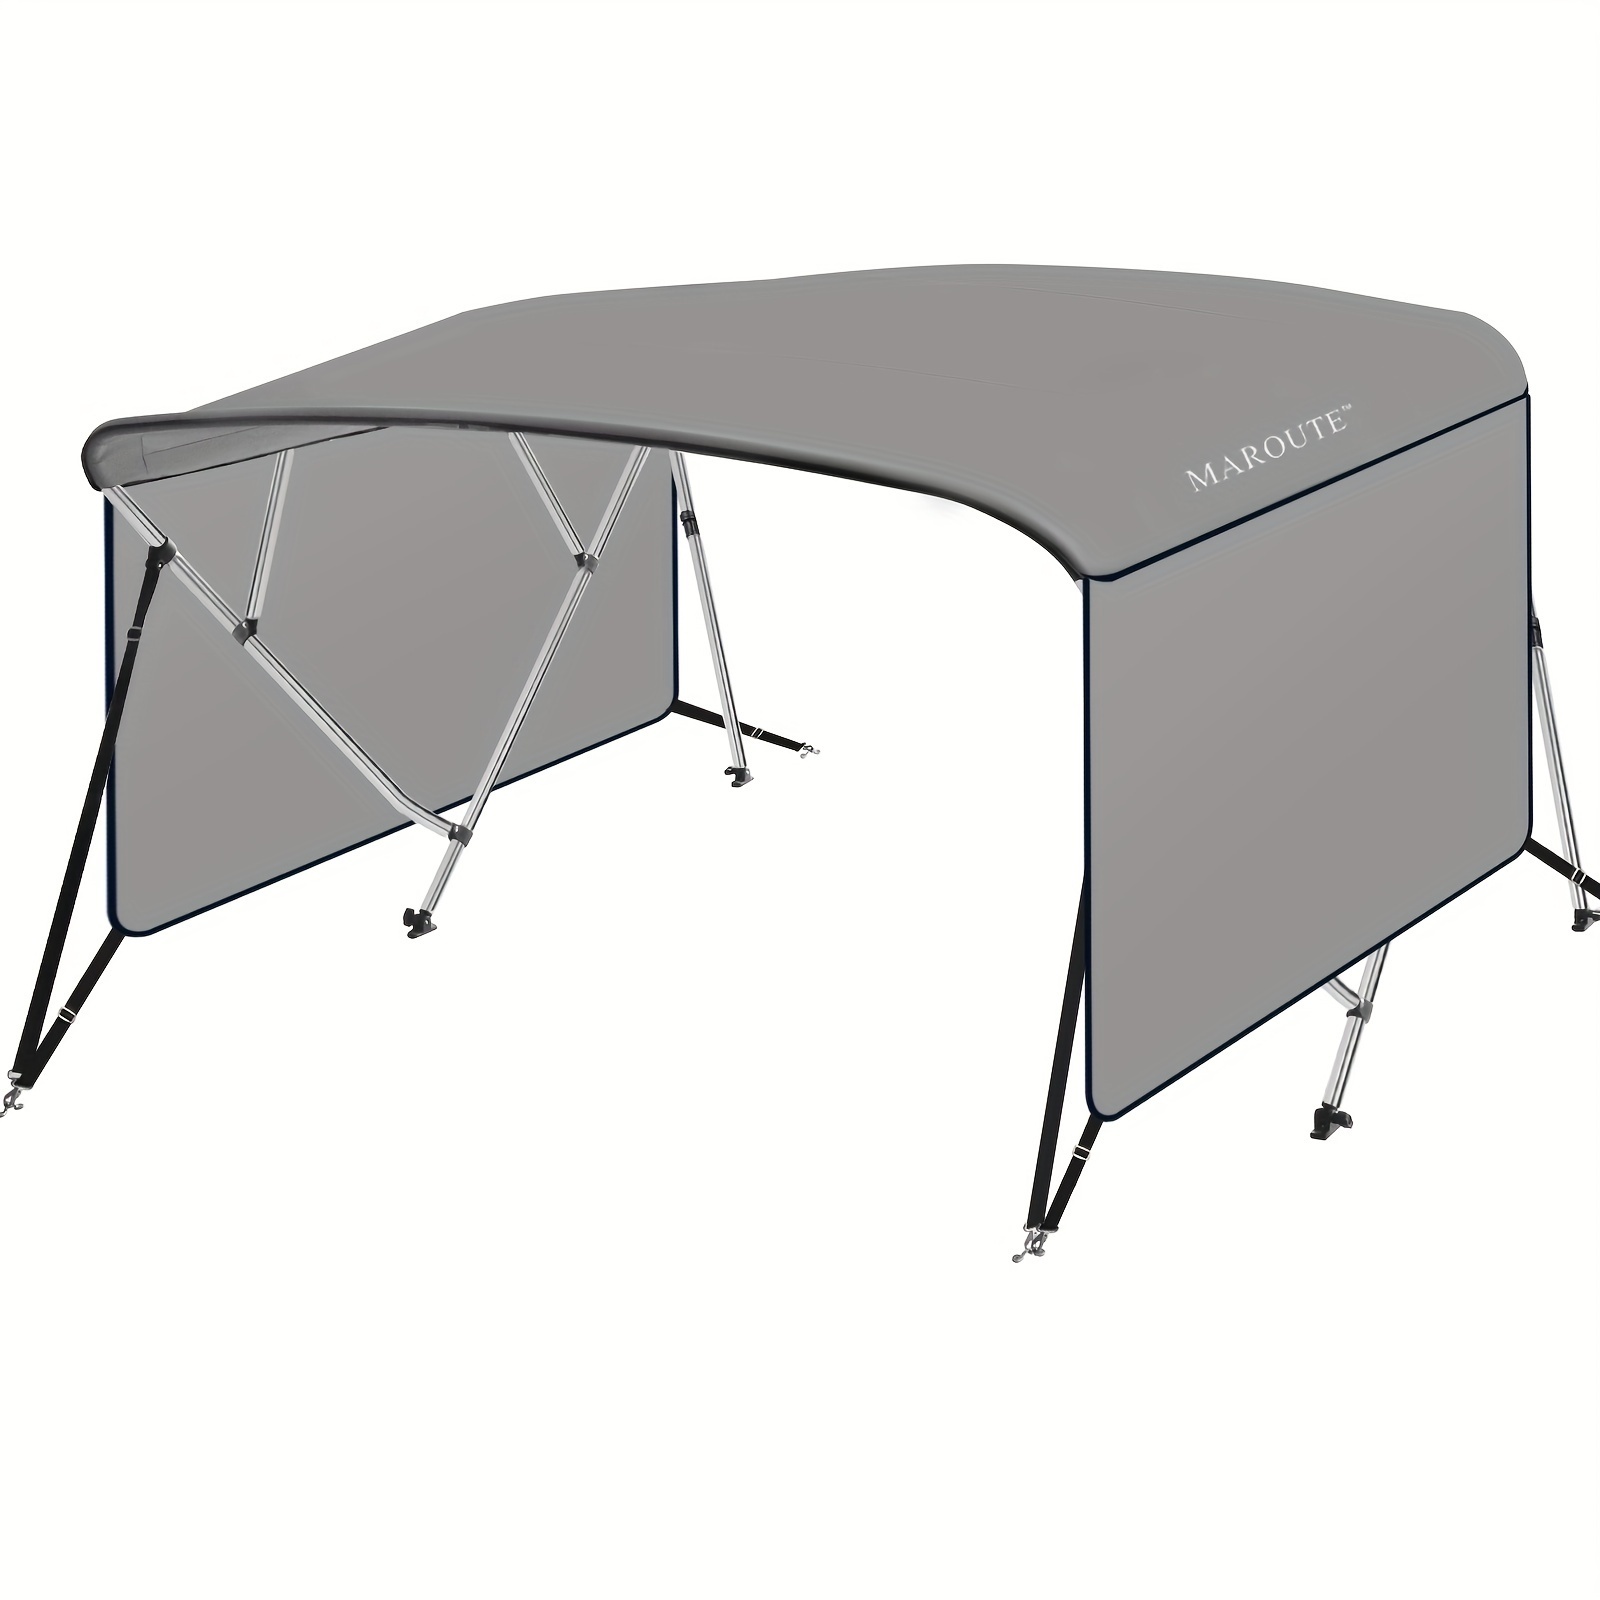 

4 Bow Bimini Top Boat Cover With 1" Aluminum Alloy Frame, Include 2 Straps, 2 Adjustable Rear Support Pole, Zippered Storage Boot, Pu Coating Canvas, Gray